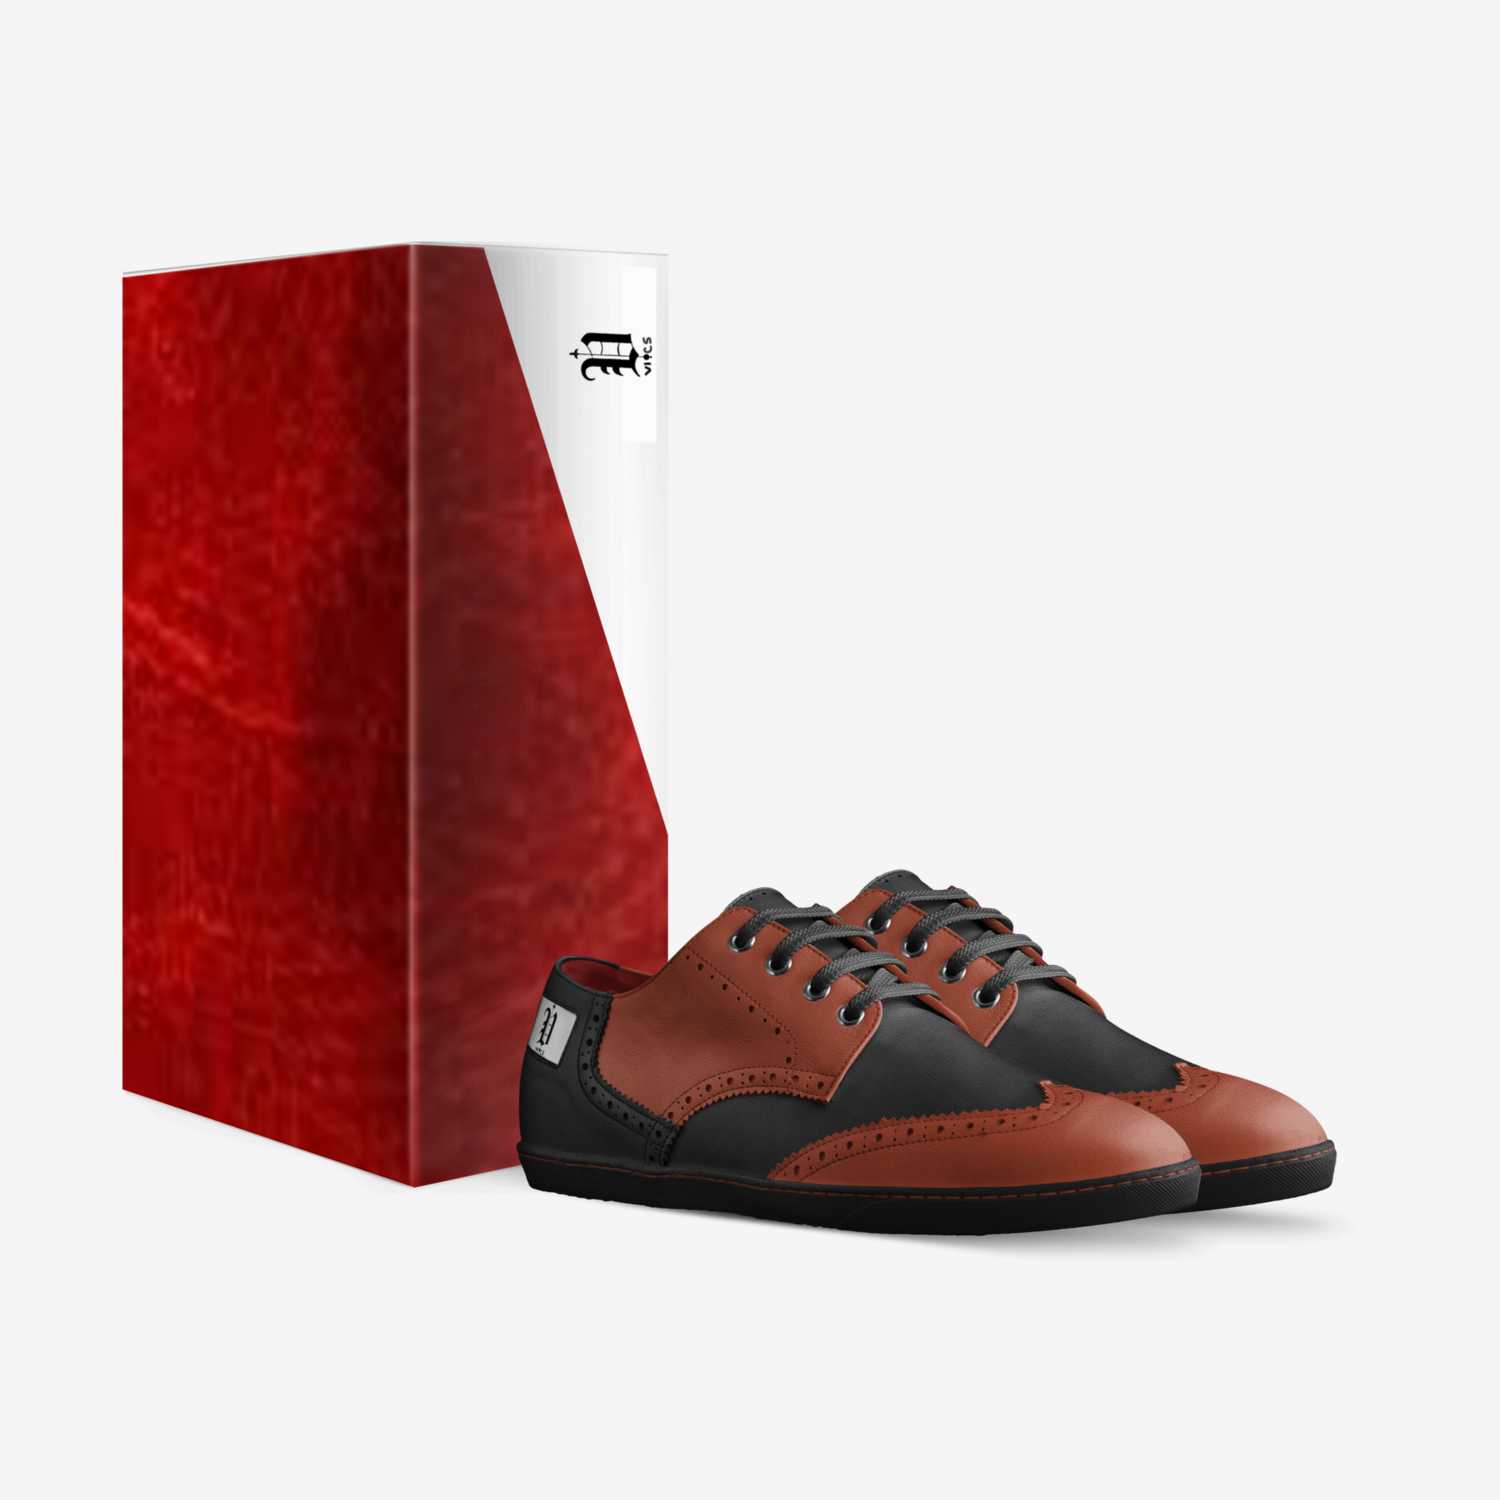 Vics redskin derby custom made in Italy shoes by Brayden Murphy | Box view